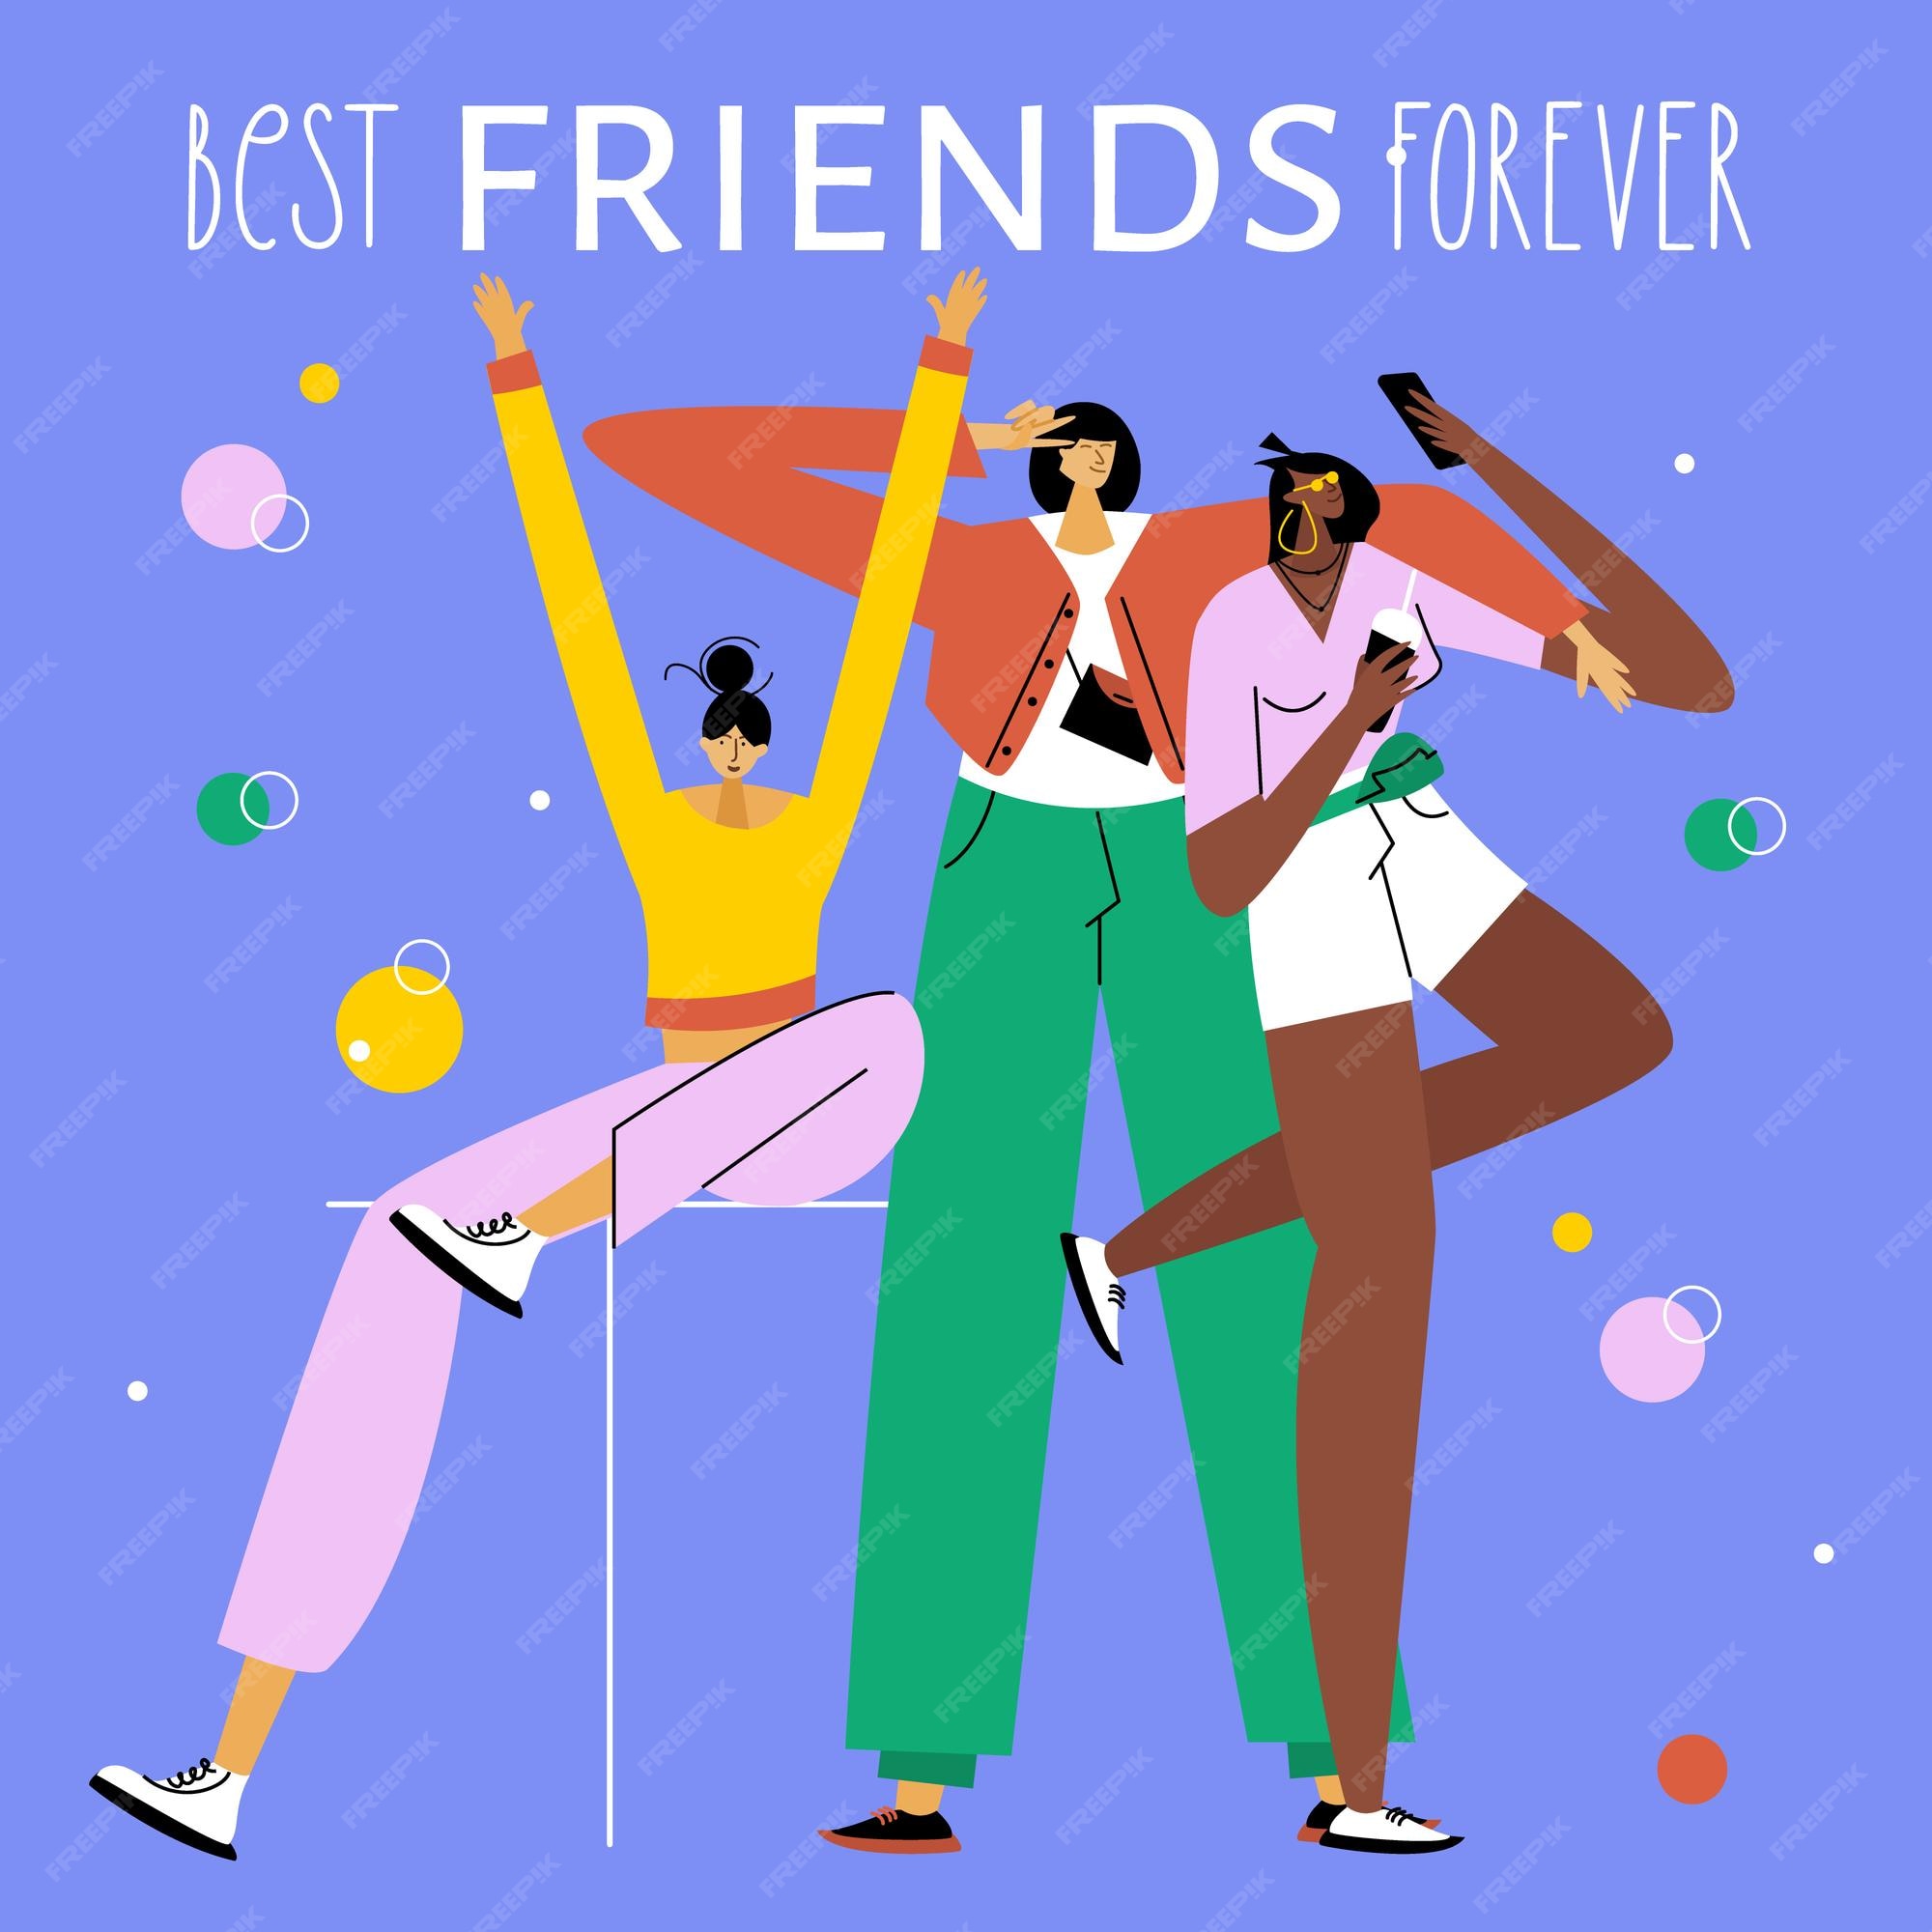 courtney zavala recommends girl friends 4 ever pic